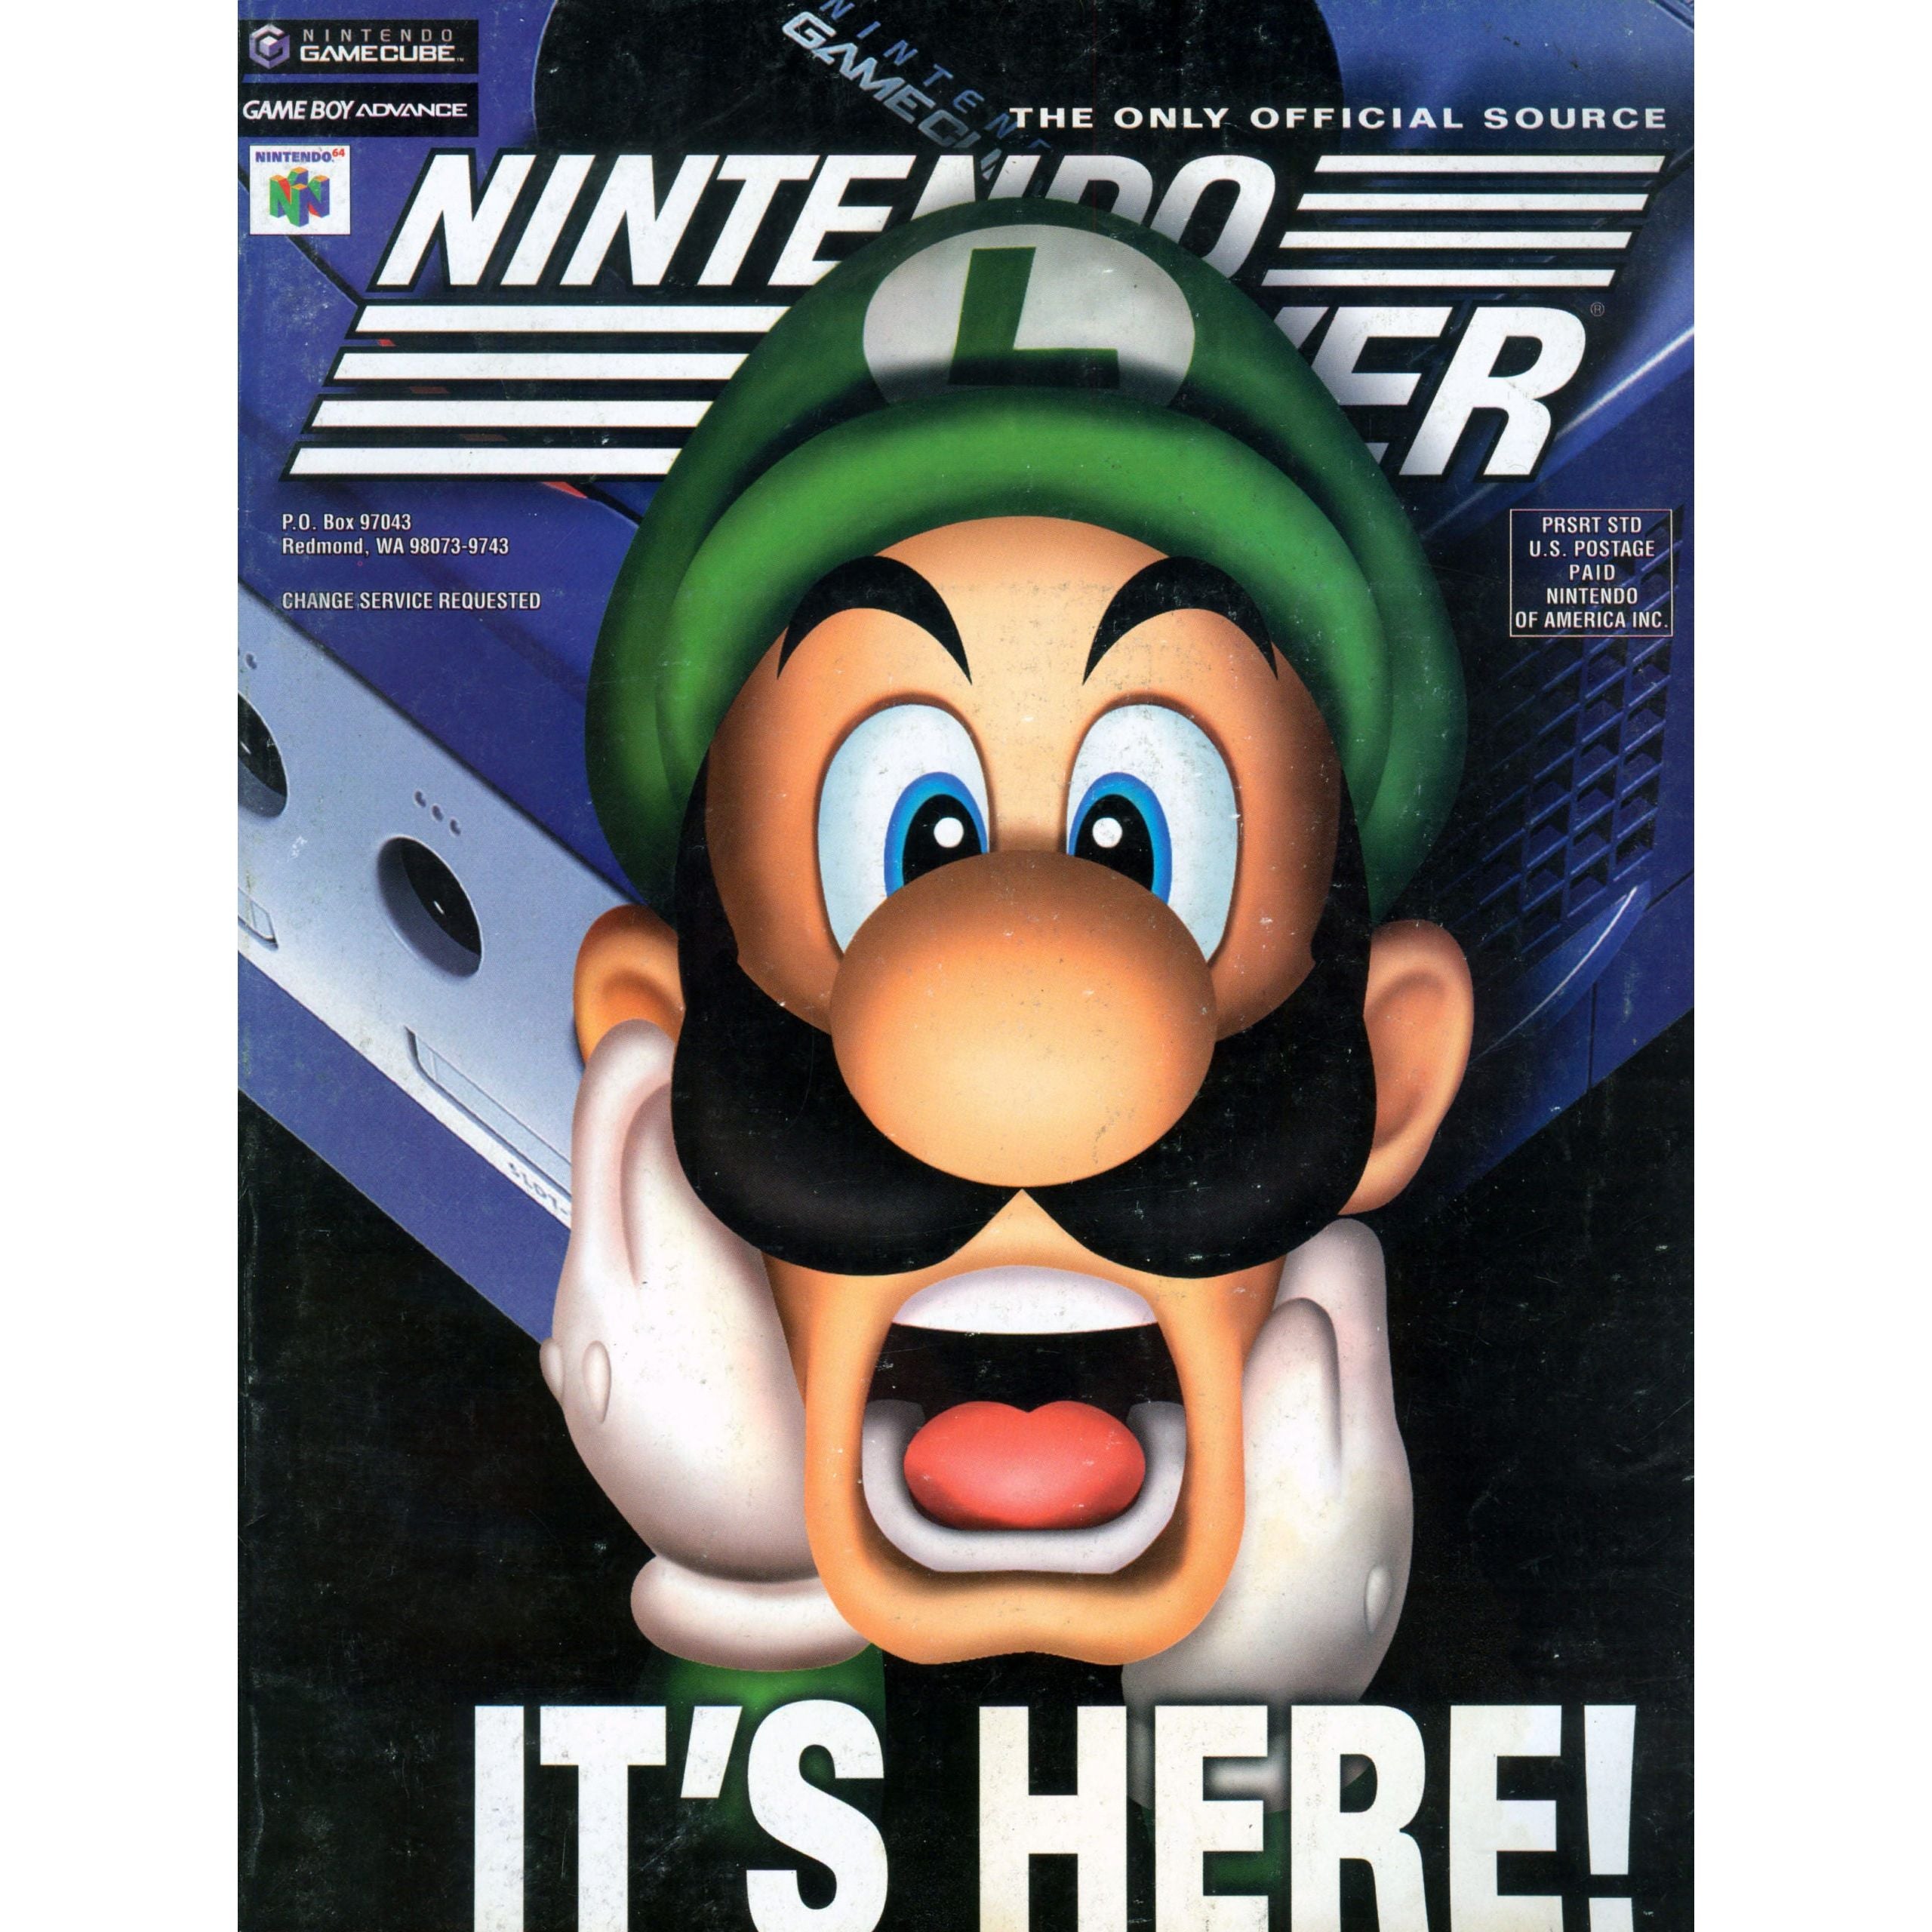 Nintendo Power Magazine (#150) - Complete and/or Good Condition